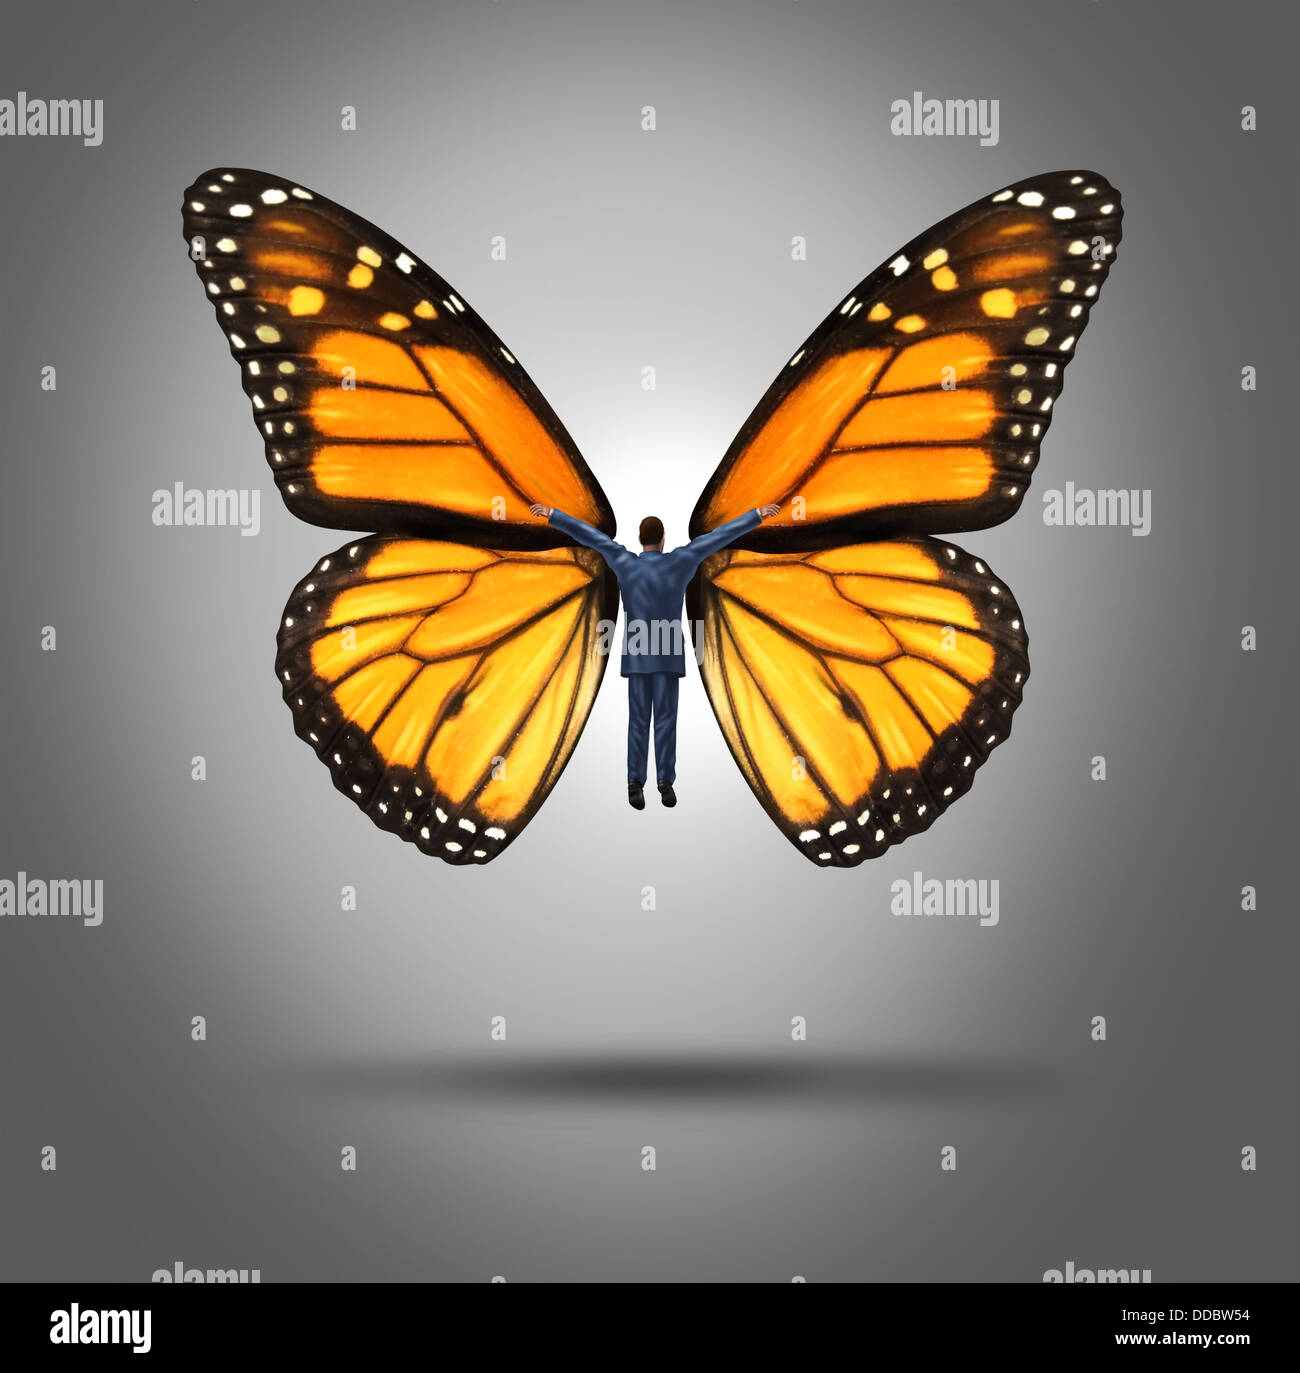 Creative leadership concept with a businessman flying up by using the wings of a monarch butterfly as a symbol of innovation and freedom of expression to aspire to higher goals of success through confidence and belief. Stock Photo